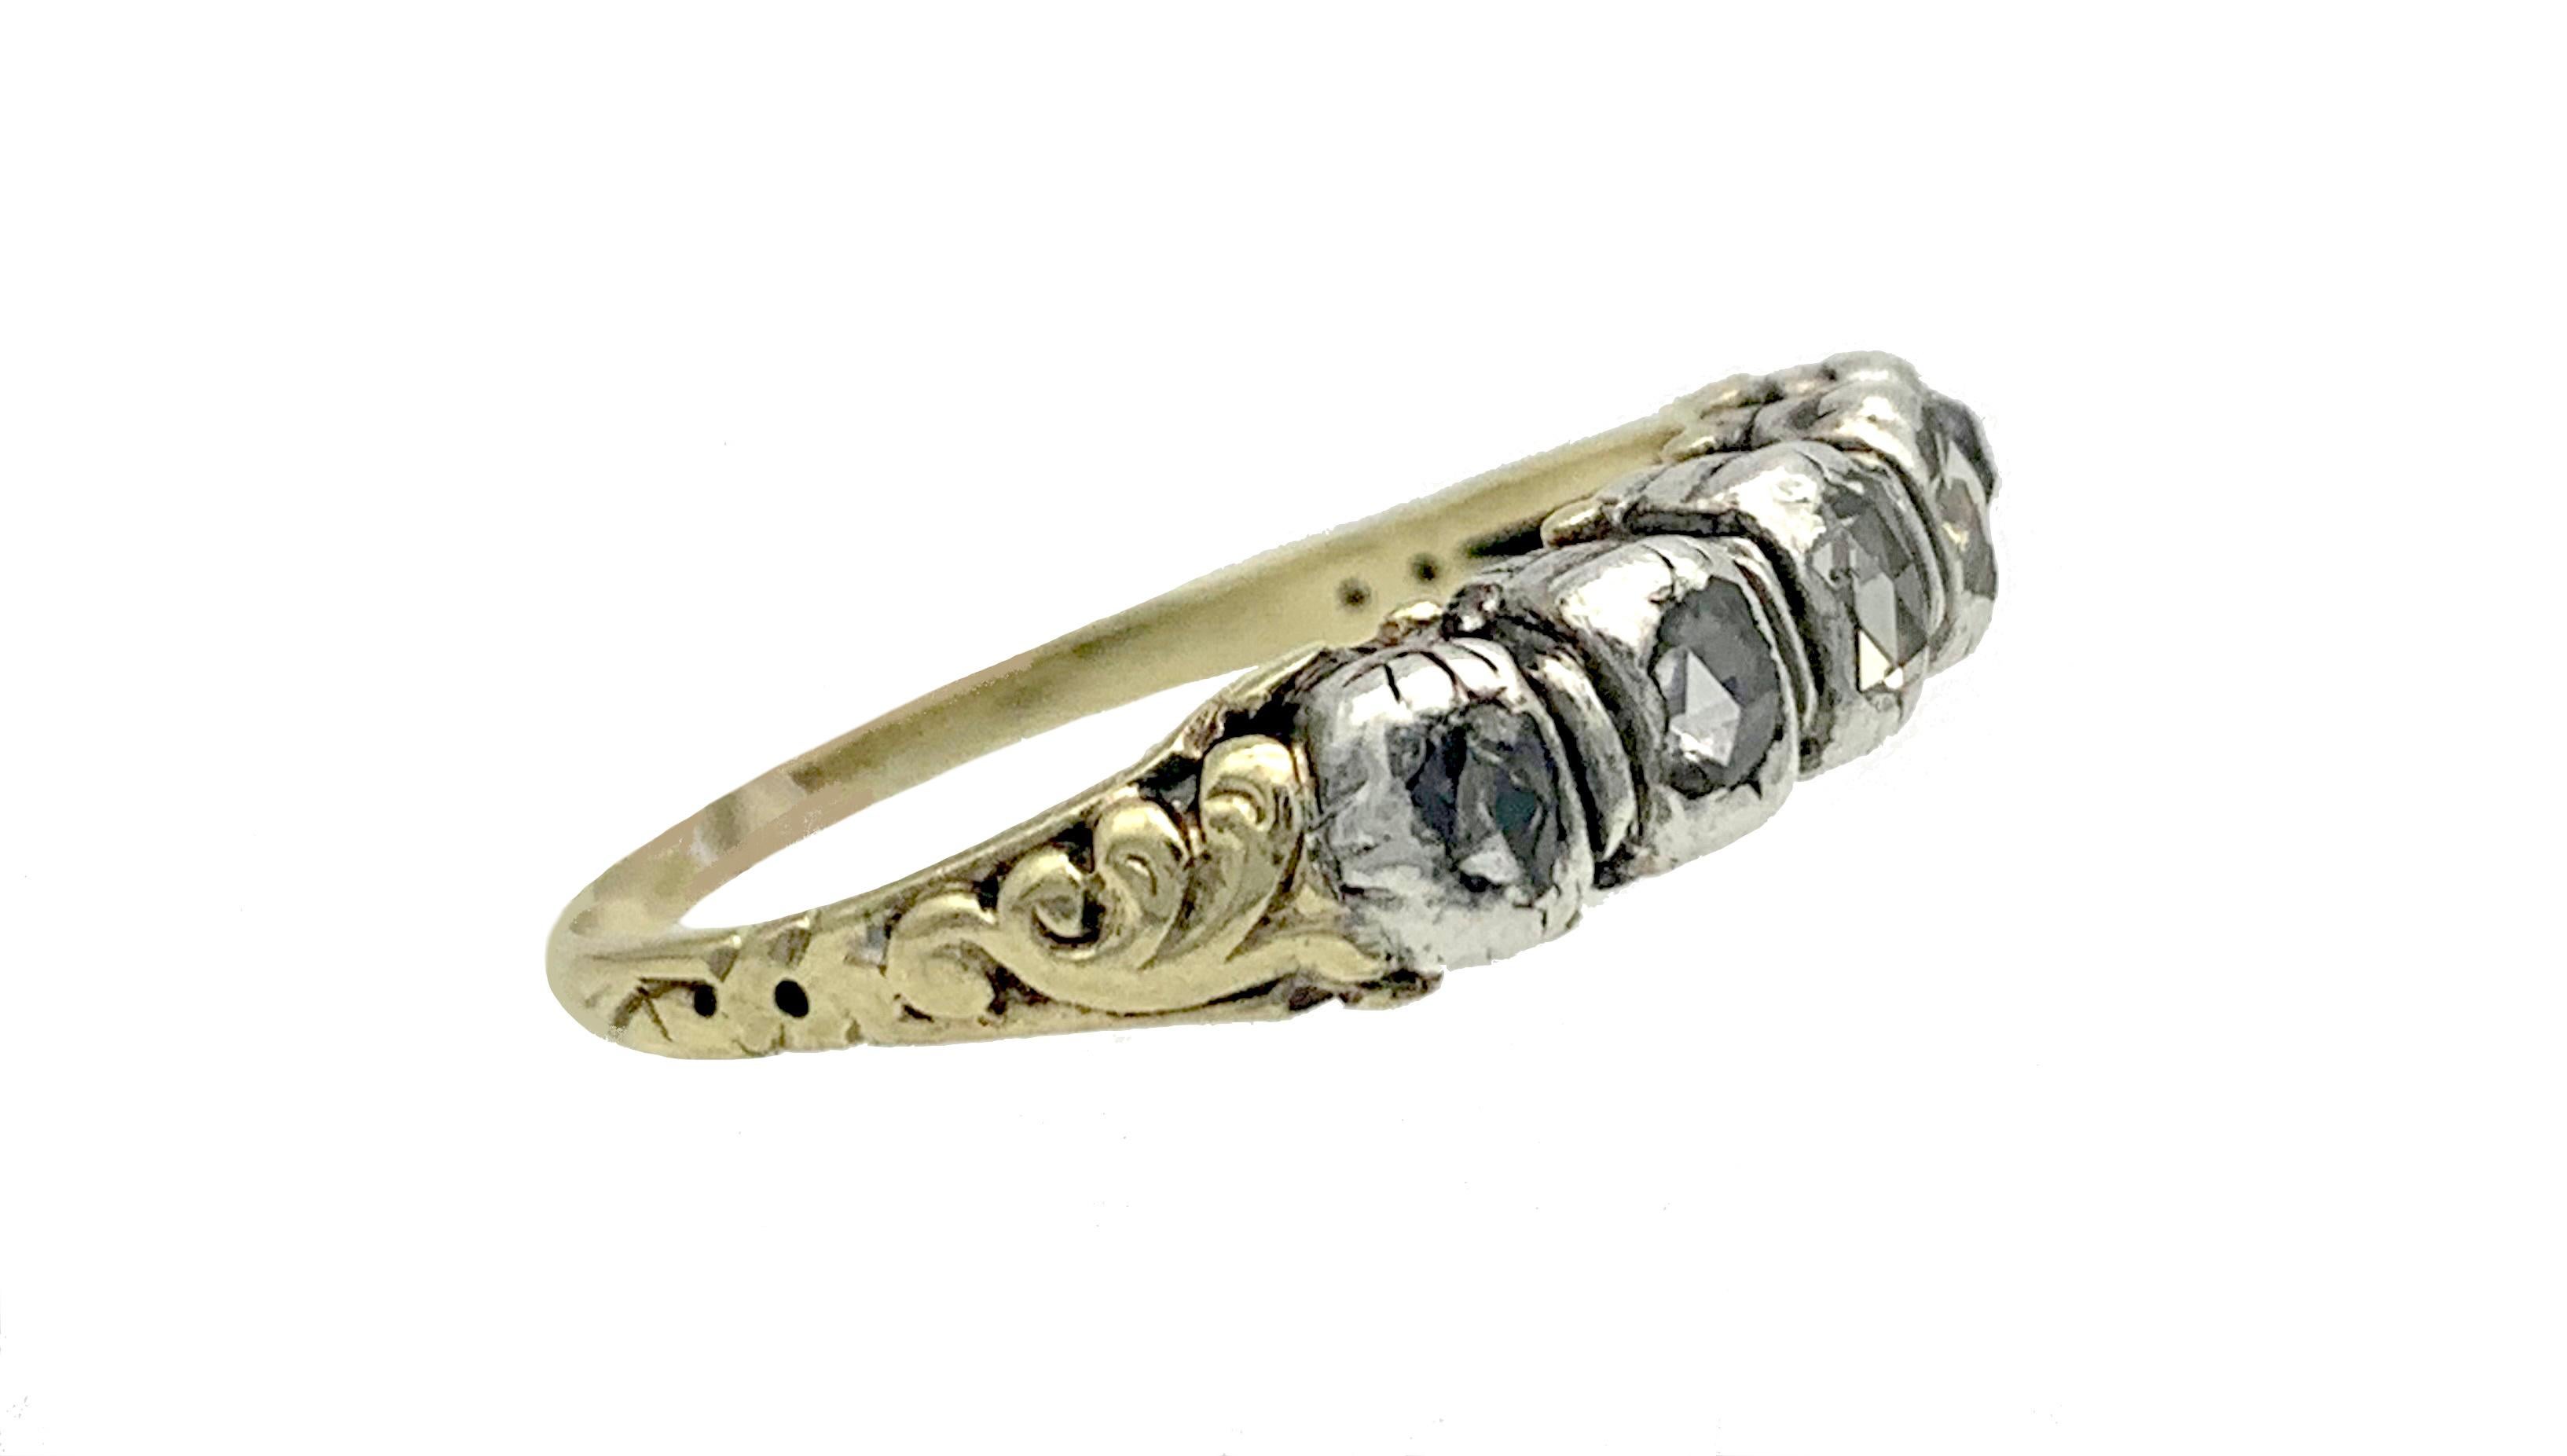 This sentimental diamond ring was created in the 18th century. Five old cut diamond roses are mounted in silver onto a gold ring engraved at the back. Each diamond is engraved on its reverse with a pansy. The ring was most certainly a love token.